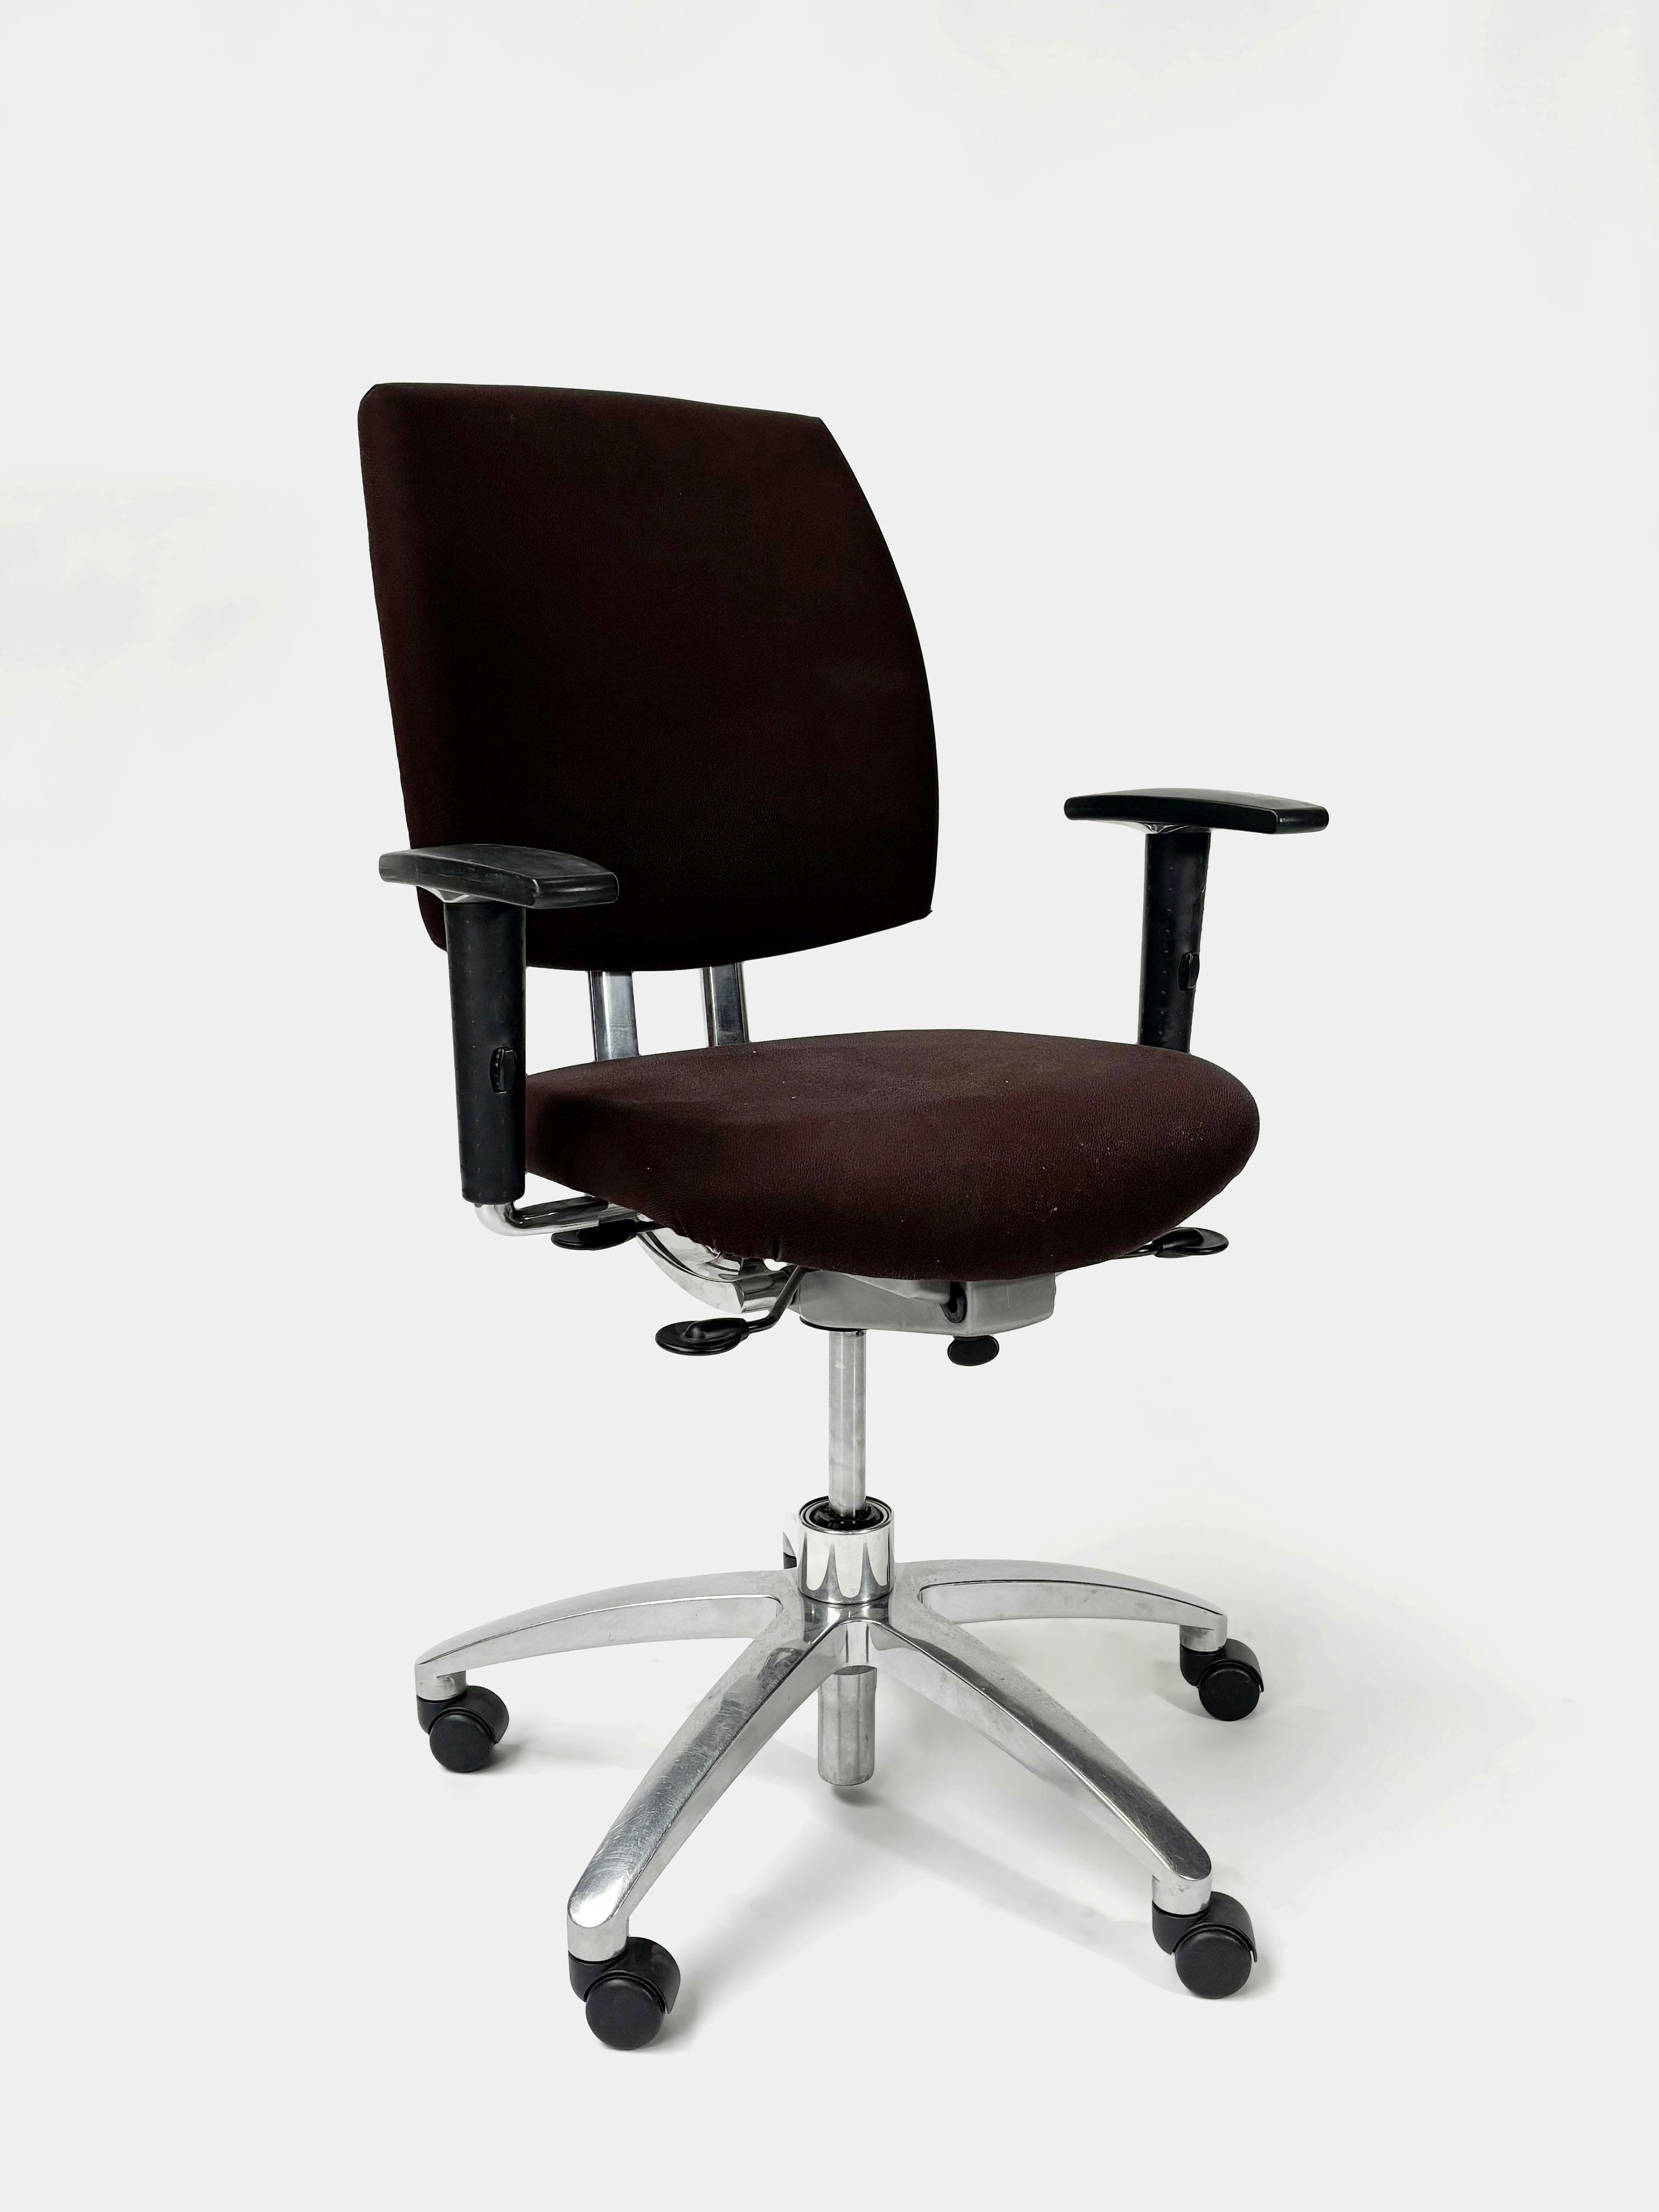 Drabert black office chair on chromed legs and with wheels - Relieve Furniture